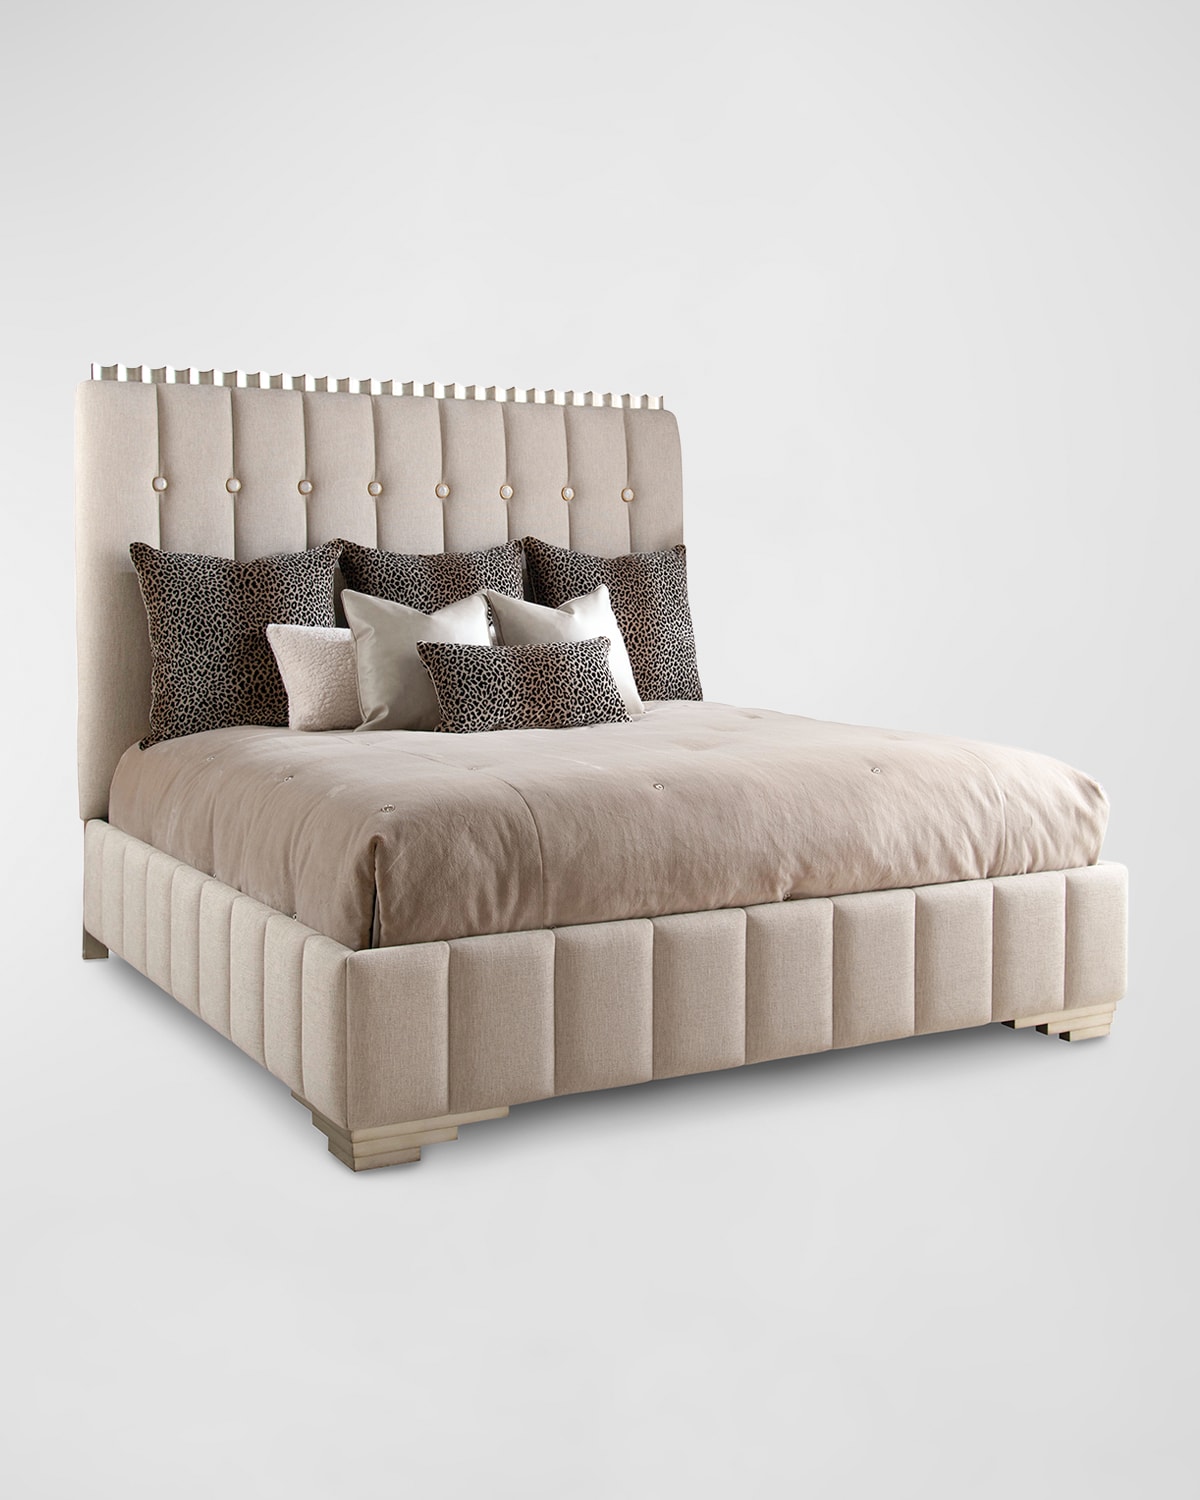 John-richard Collection Horizon Silver King Bed In Neutral